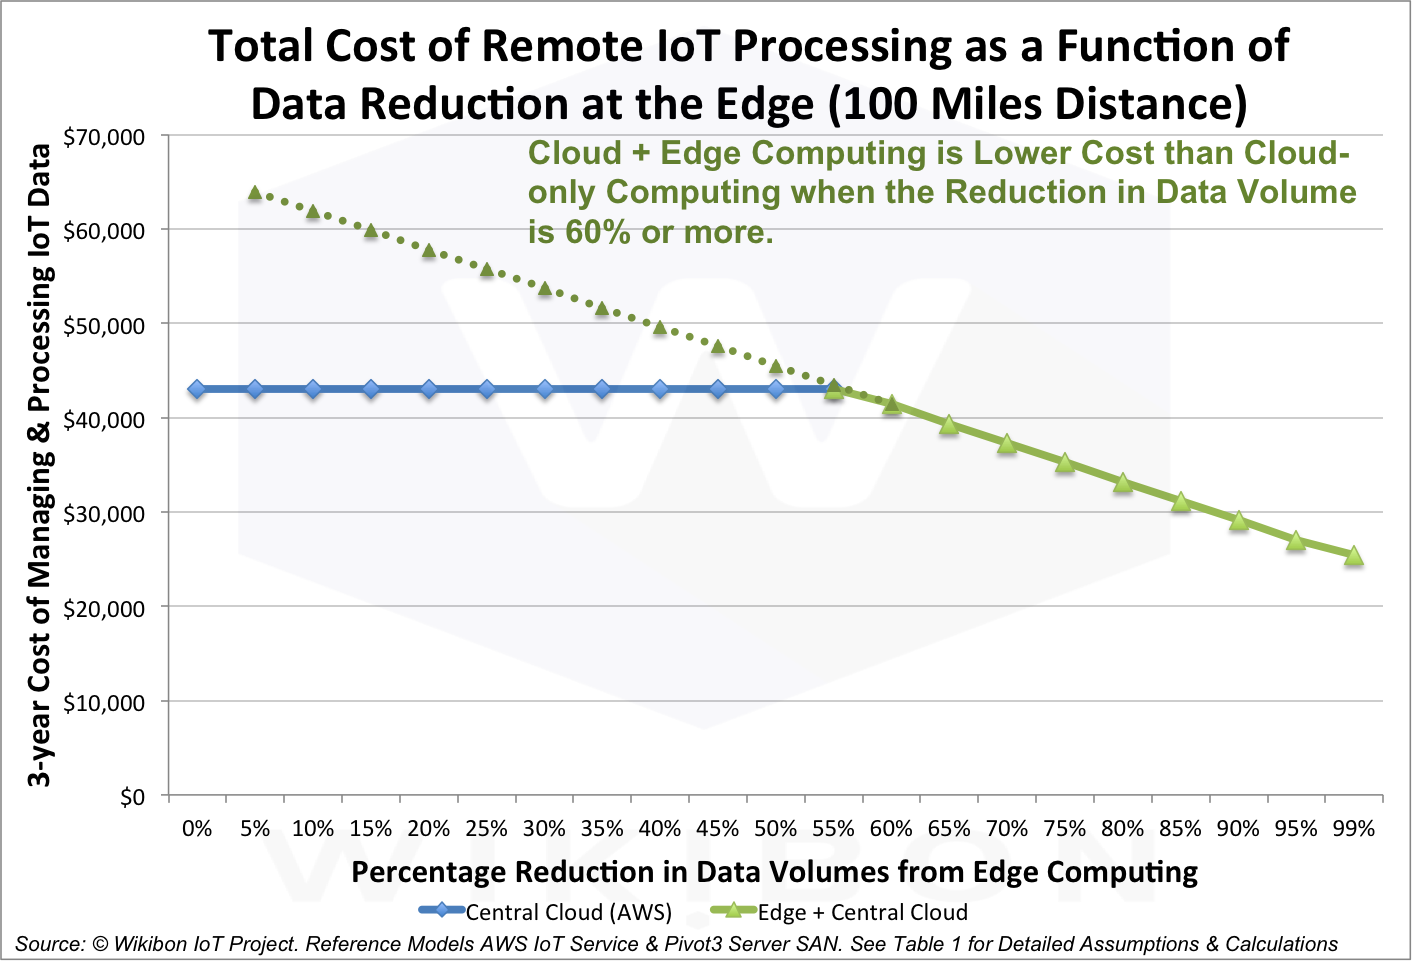 Figure 3: Total Cost of Remote IoT Processing a a Function of Data Reduction at the Edge Source: © Wikibon IoT Project. Reference Models AWS IoT Service & Pivot3 Server SAN. One assumption is a distance of 100 miles between the Edge computing and the Datacenter. See Table 1 for additional Detailed Assumptions & Calculations.